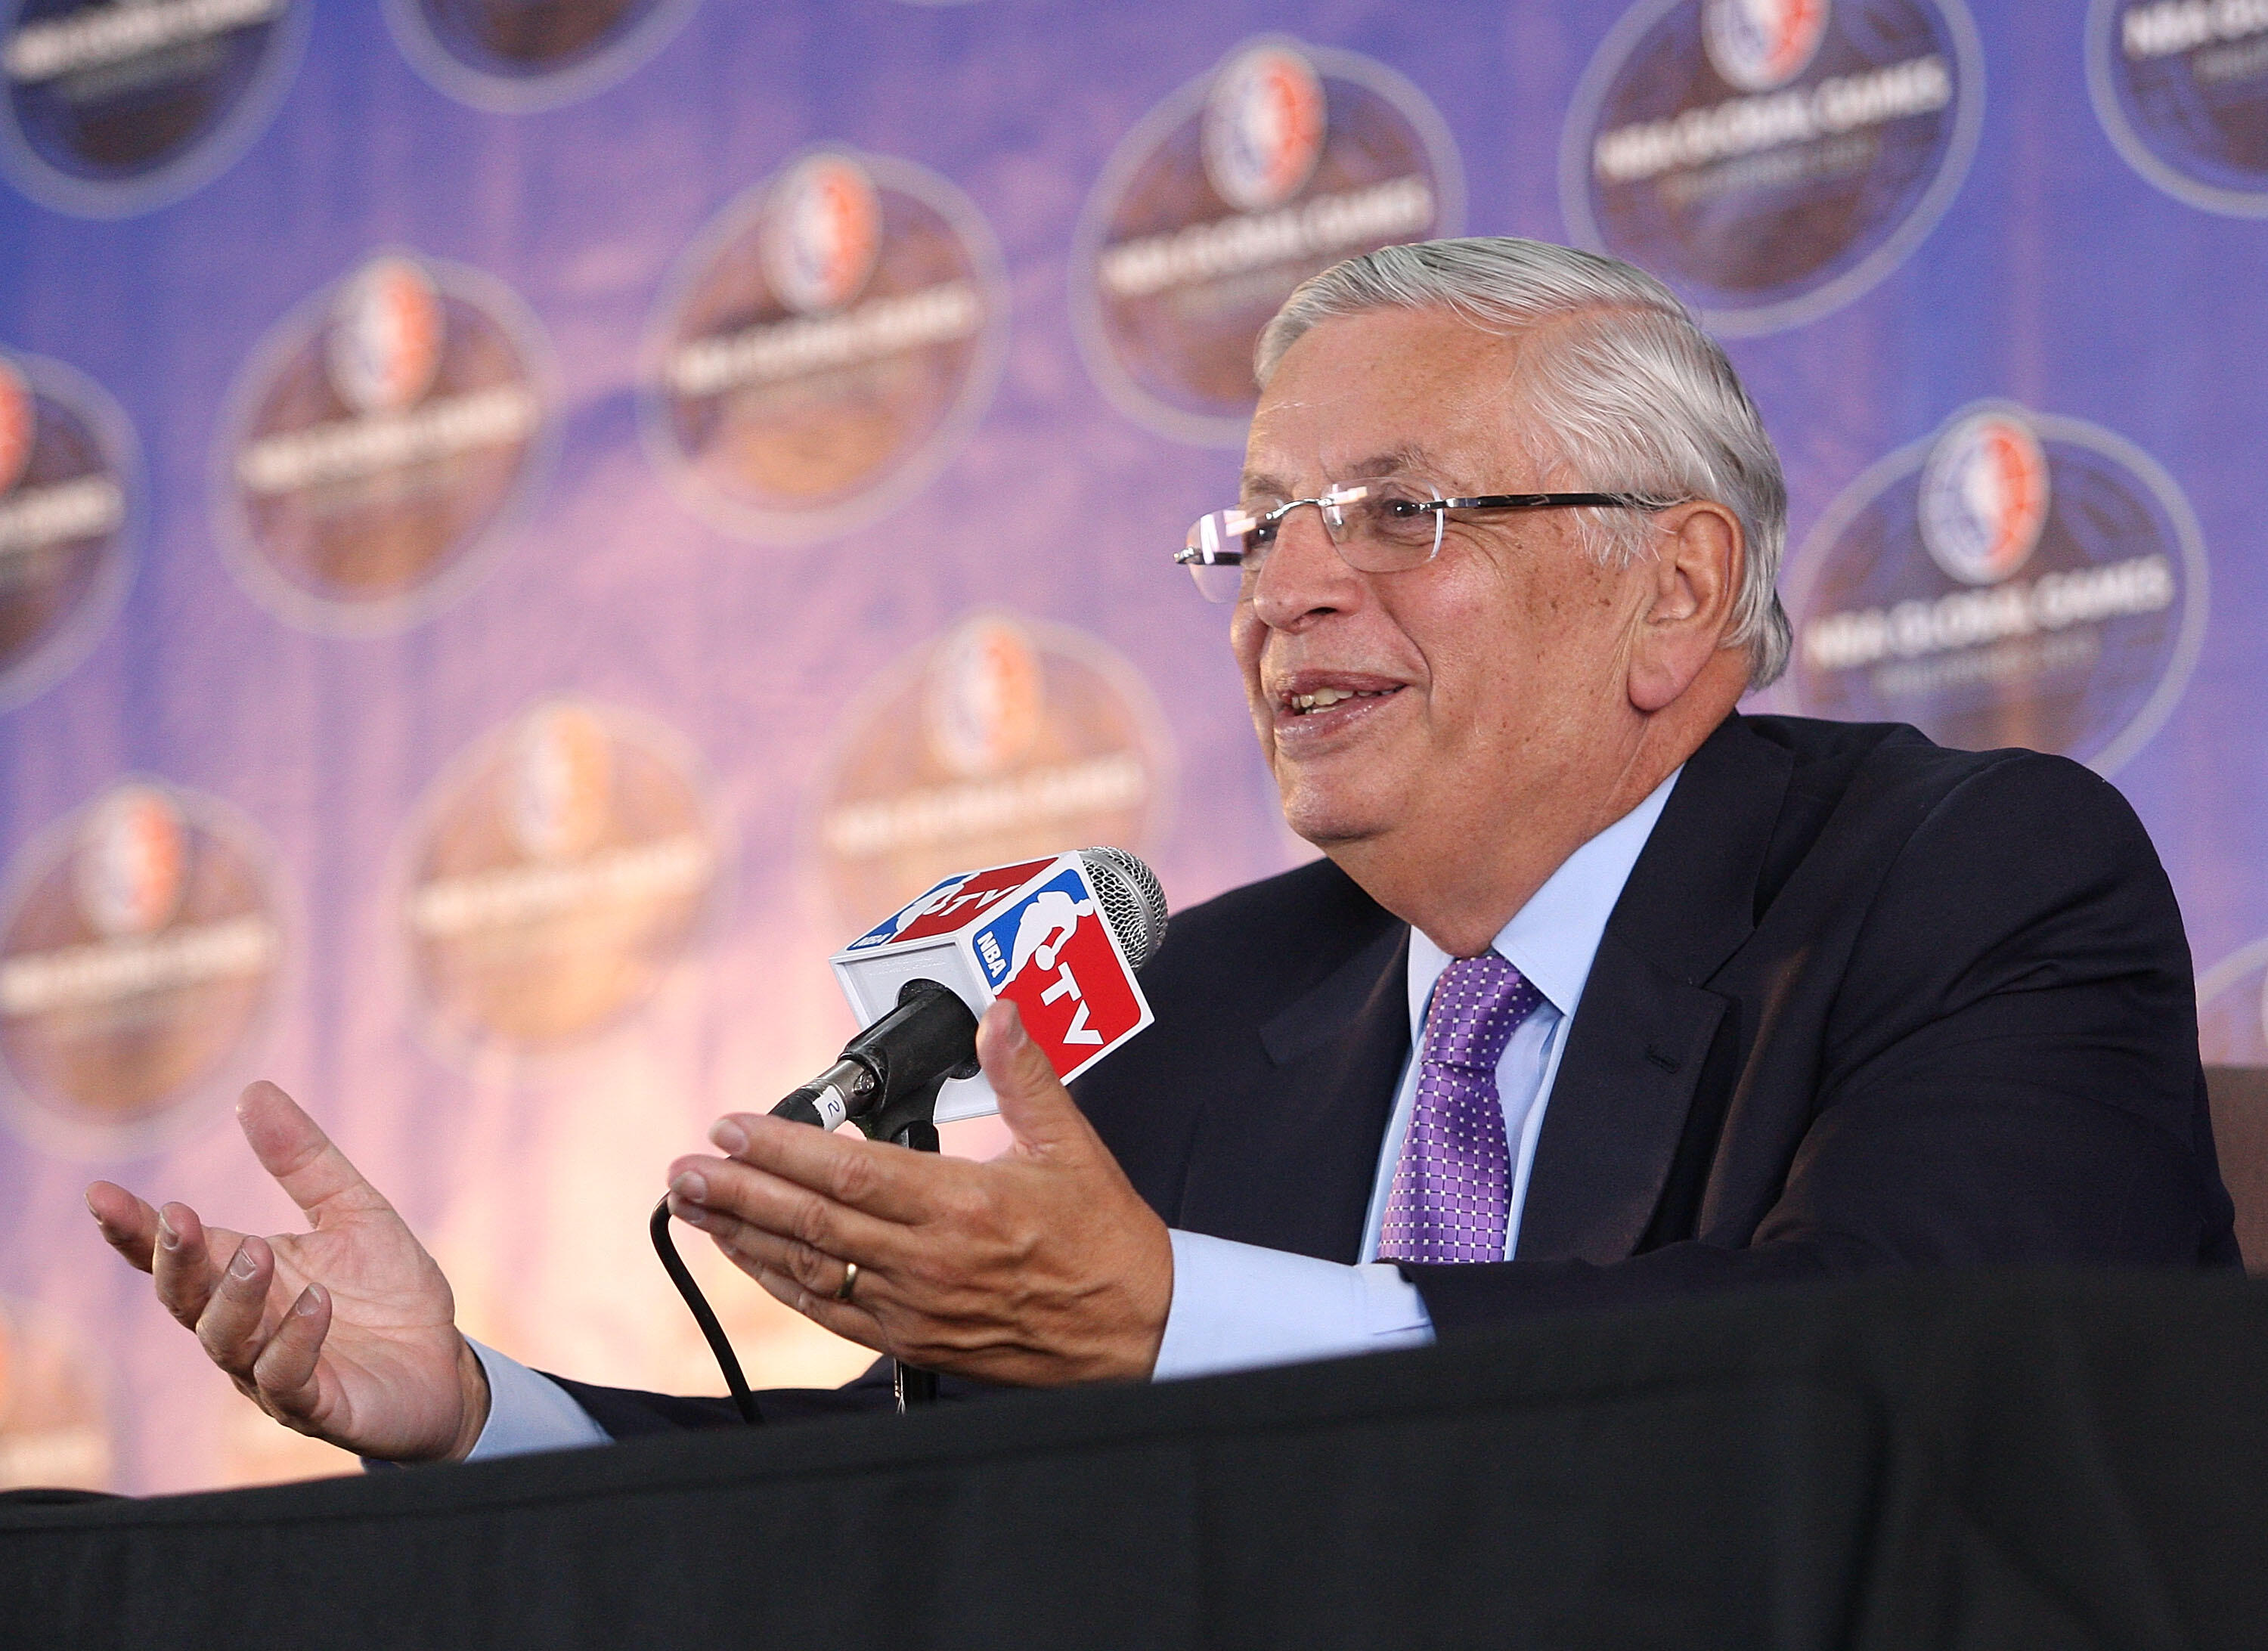 MANILA, PHILIPPINES - OCTOBER 10:  David Stern at a Press Conference before the NBA match between the Houston Rockets and the Indiana Pacers at the Mall of Asia Arena on October 10, 2013 in Manila, Philippines.  (Photo by Mike Young/Getty Images)